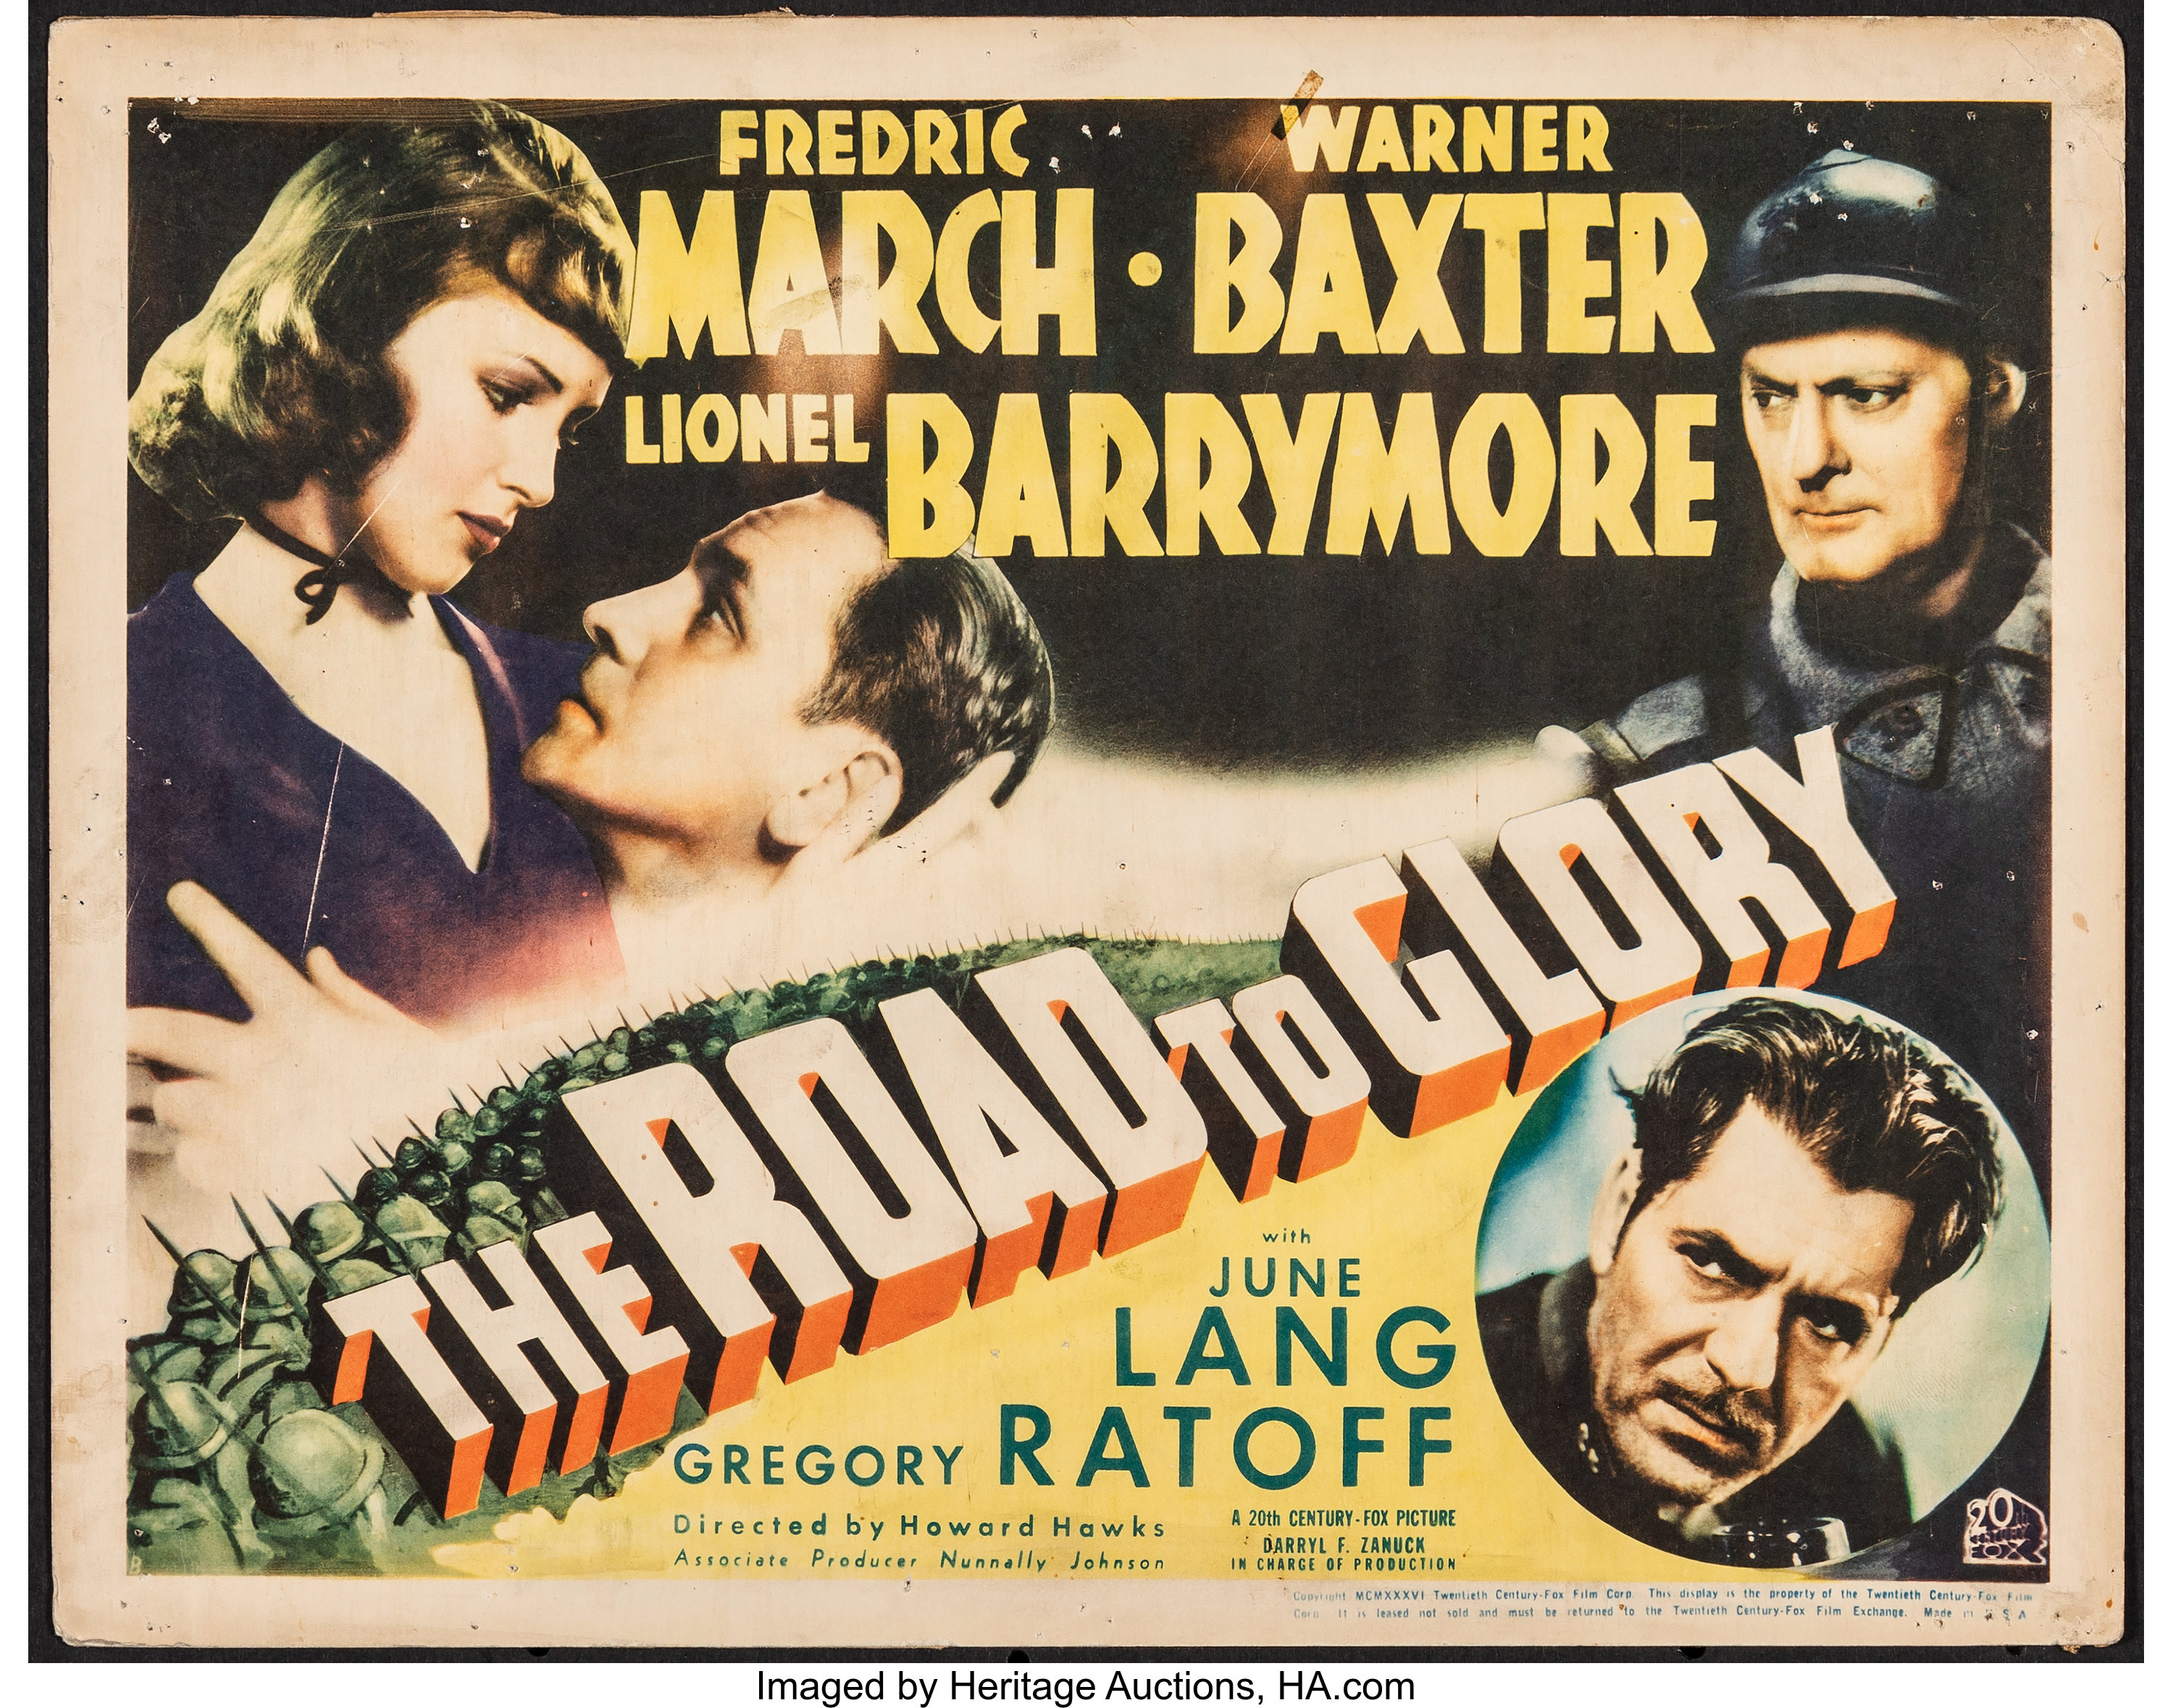 War Movie - The Road to Glory (1936)